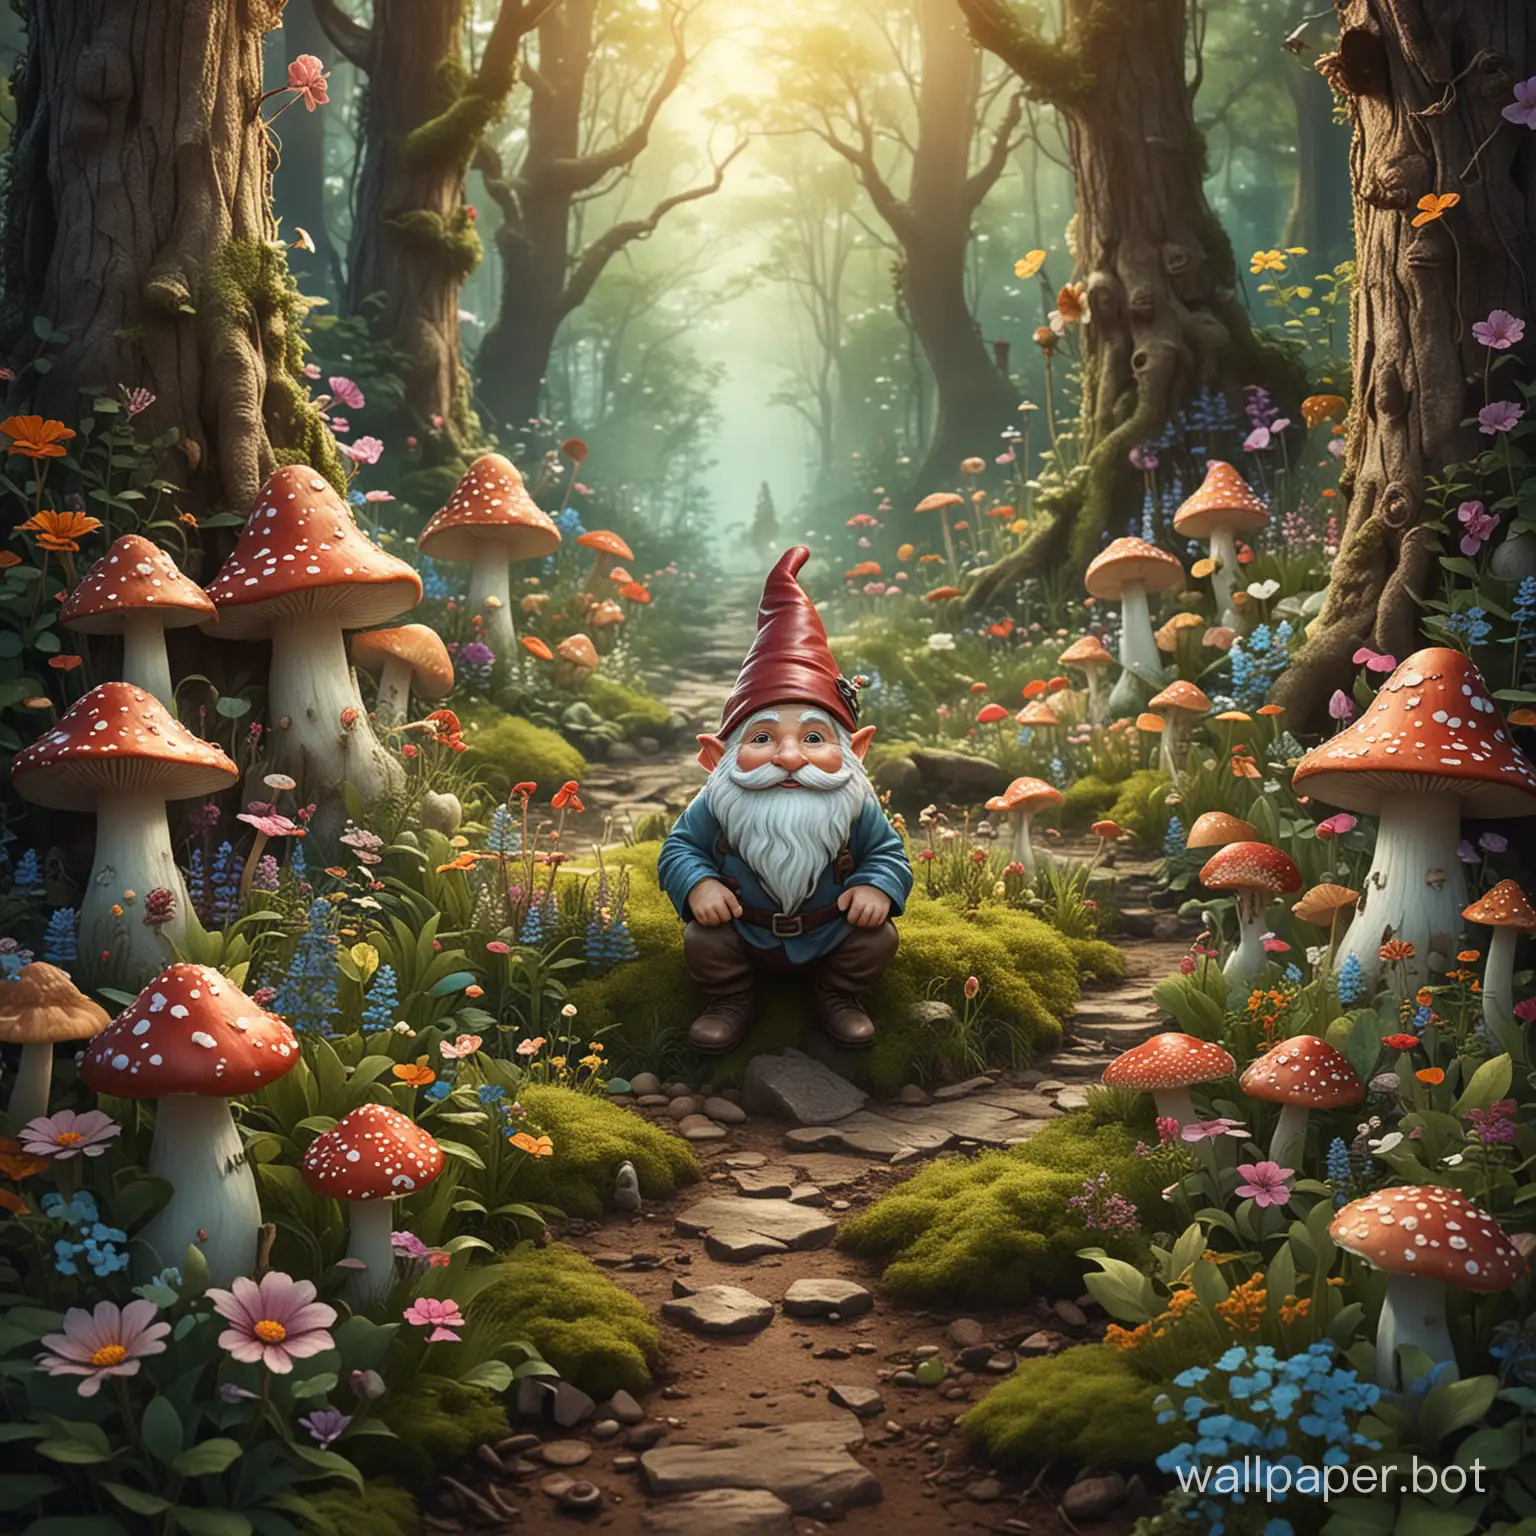 Fantasy forest with gnome flowers, mushrooms and plants in artsy style